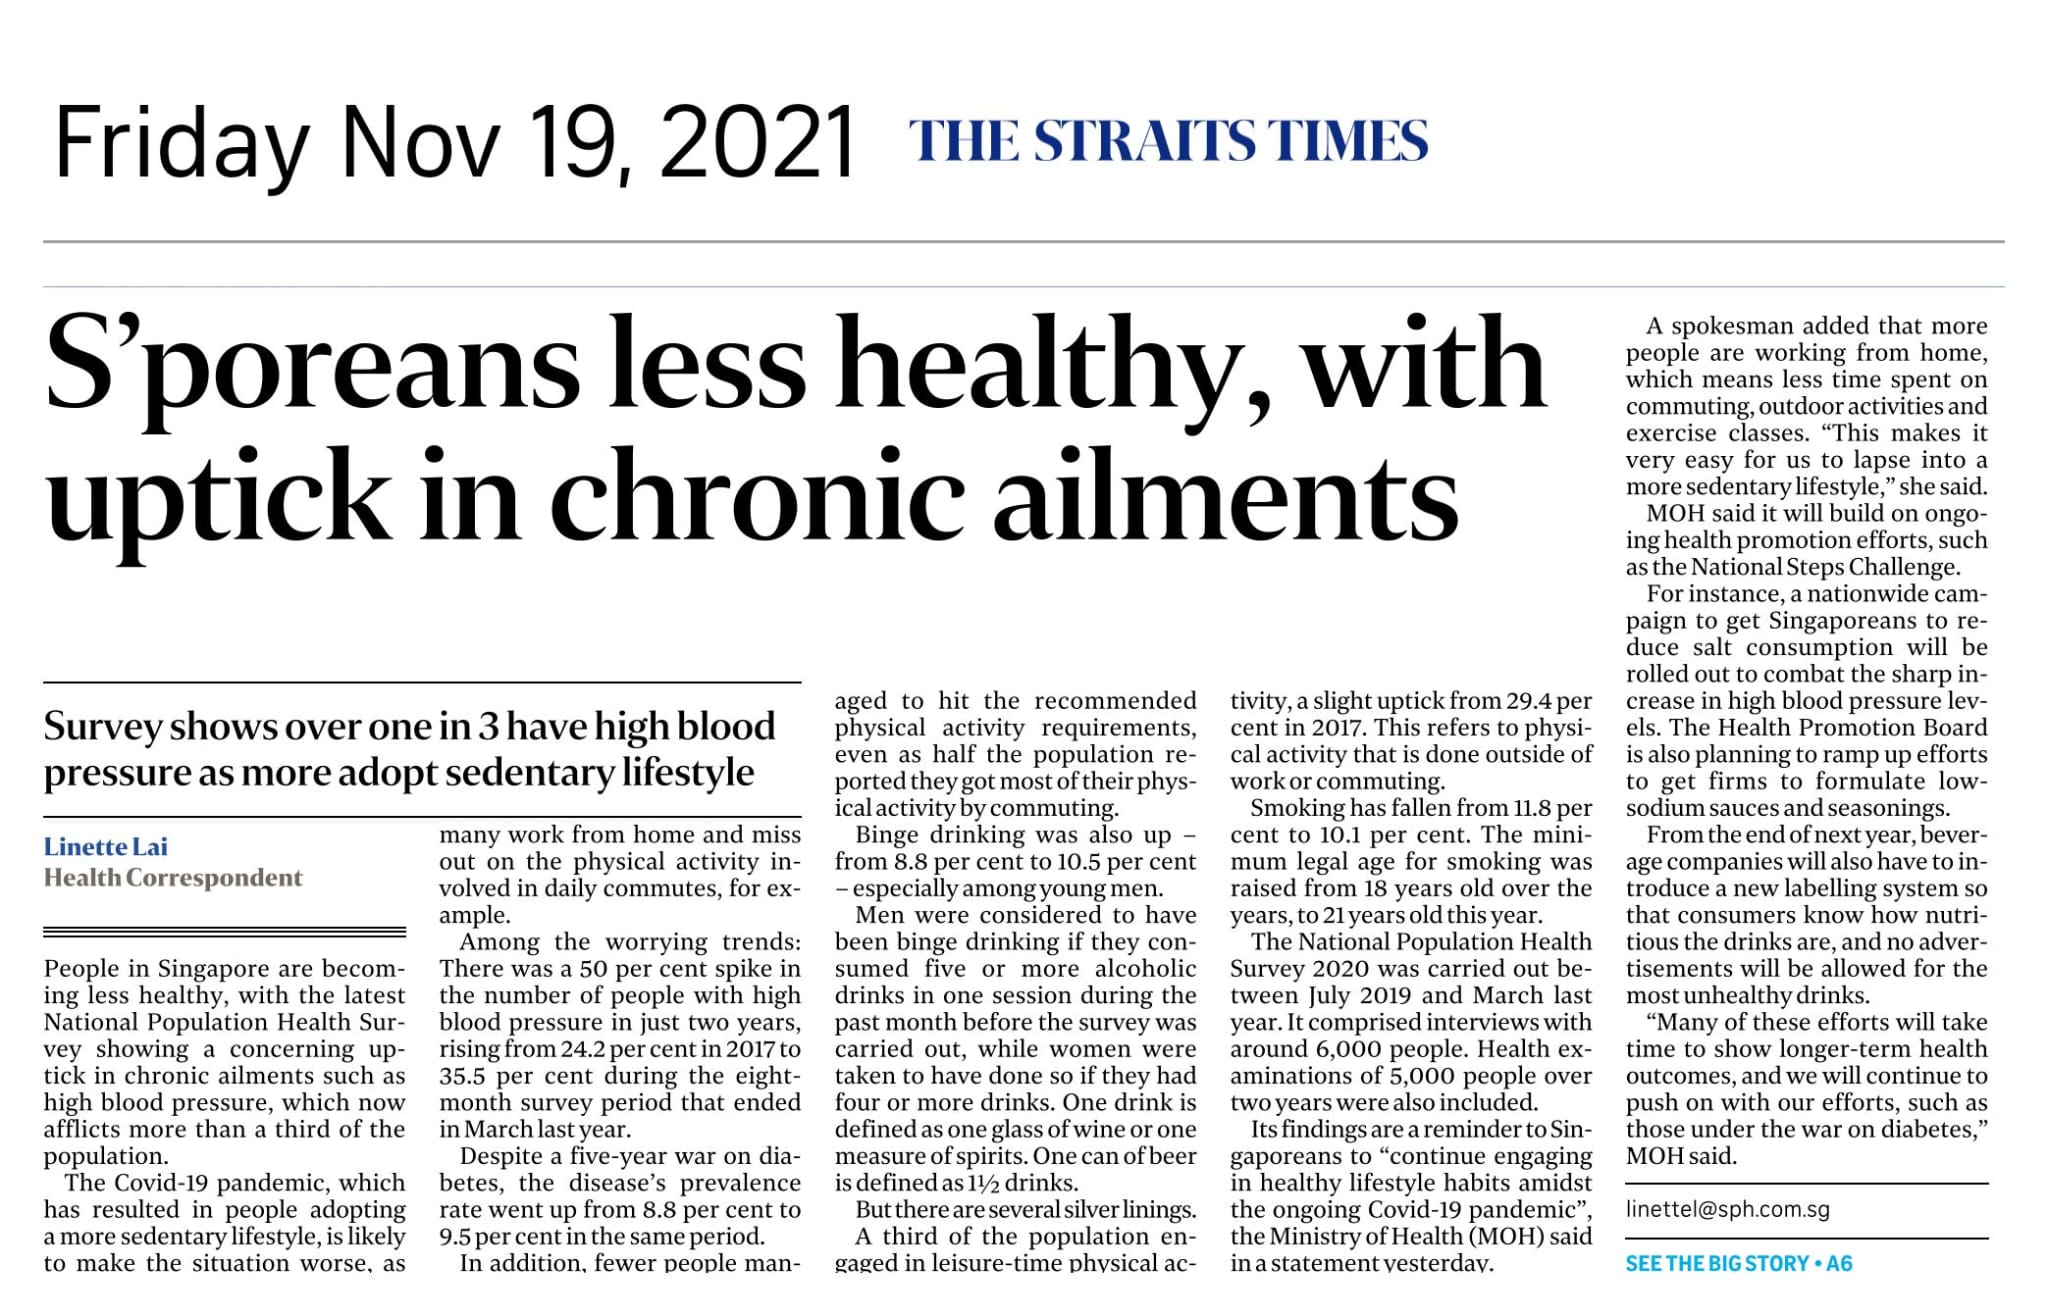 Singaporeans Less Healthy, with Uptick in Chronic Ailments - Published in The Straits Times Nov 19, 2021